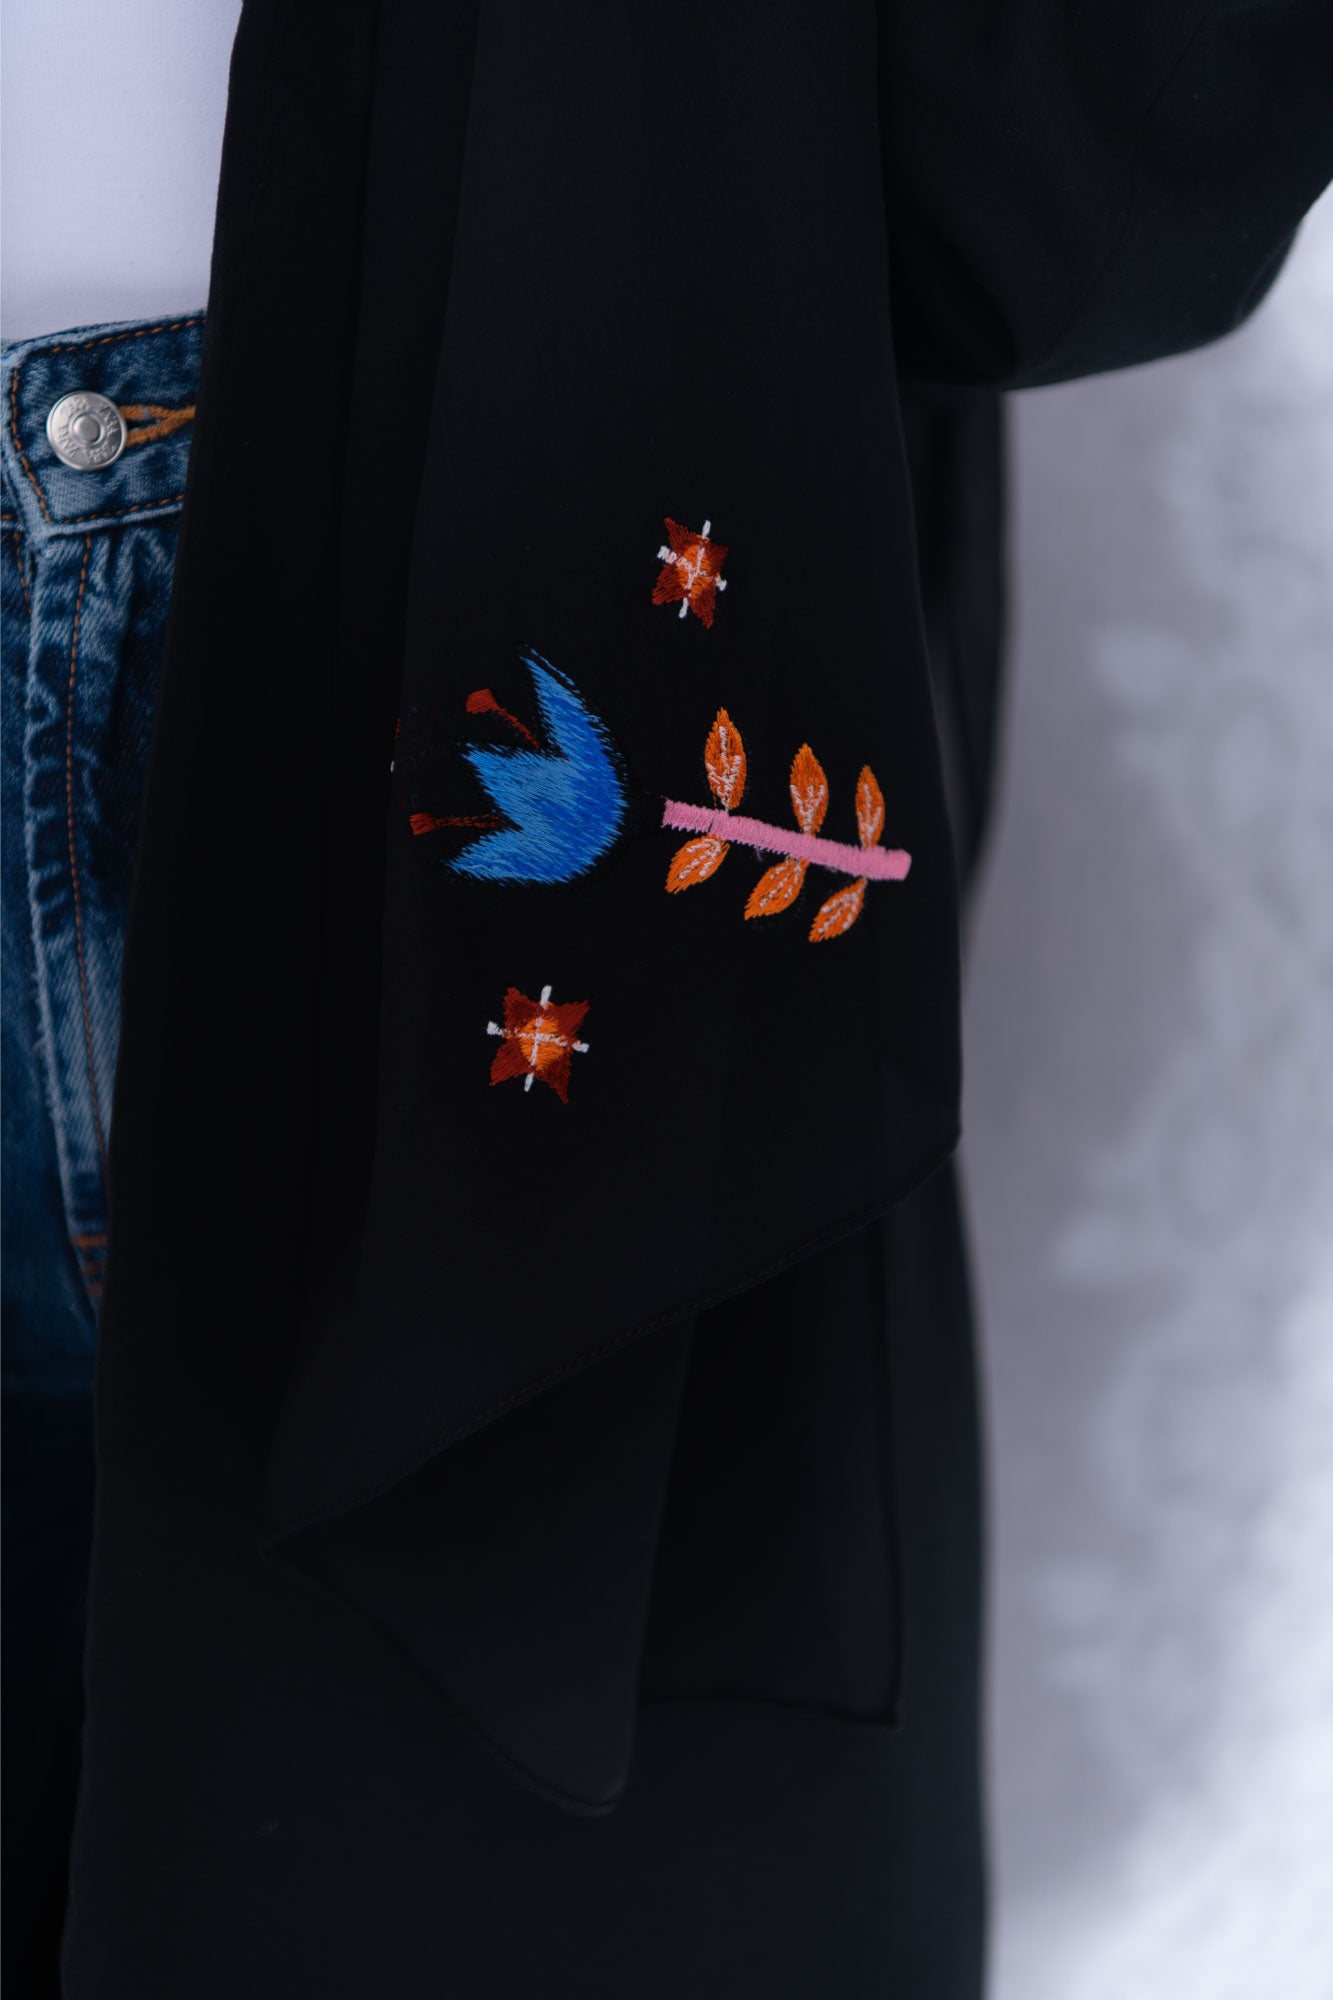 Black Cotton Abaya with Blue Embroidery